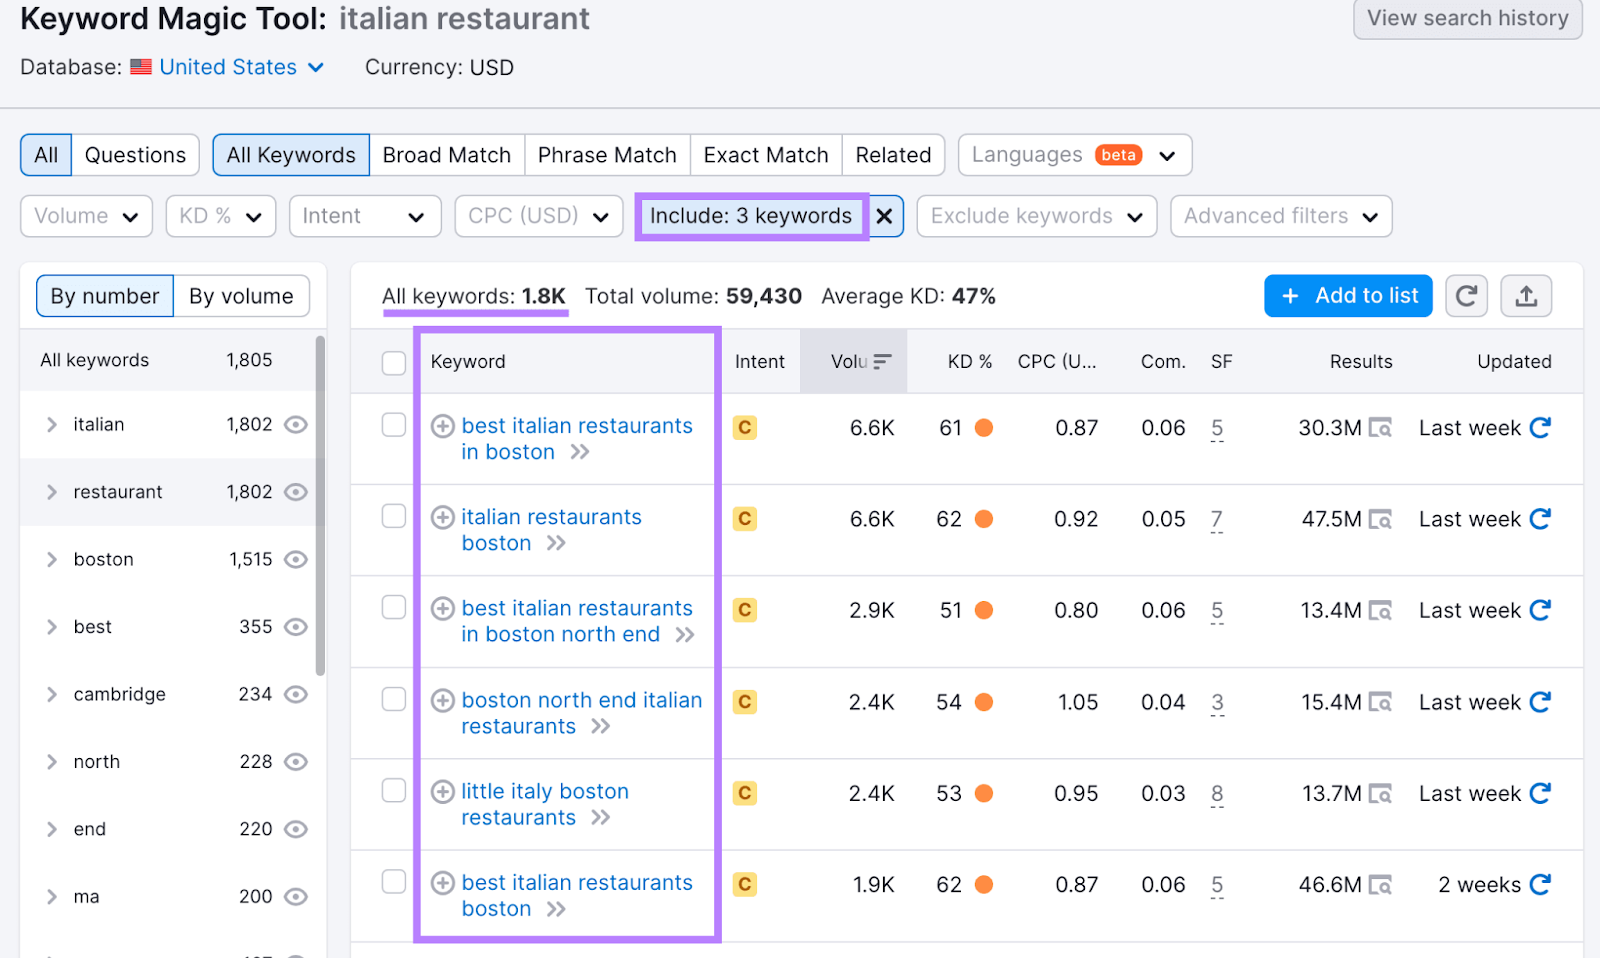 Keyword Magic Tool results for "italian restaurant" with "Include: 3 keywords" filter highlighted